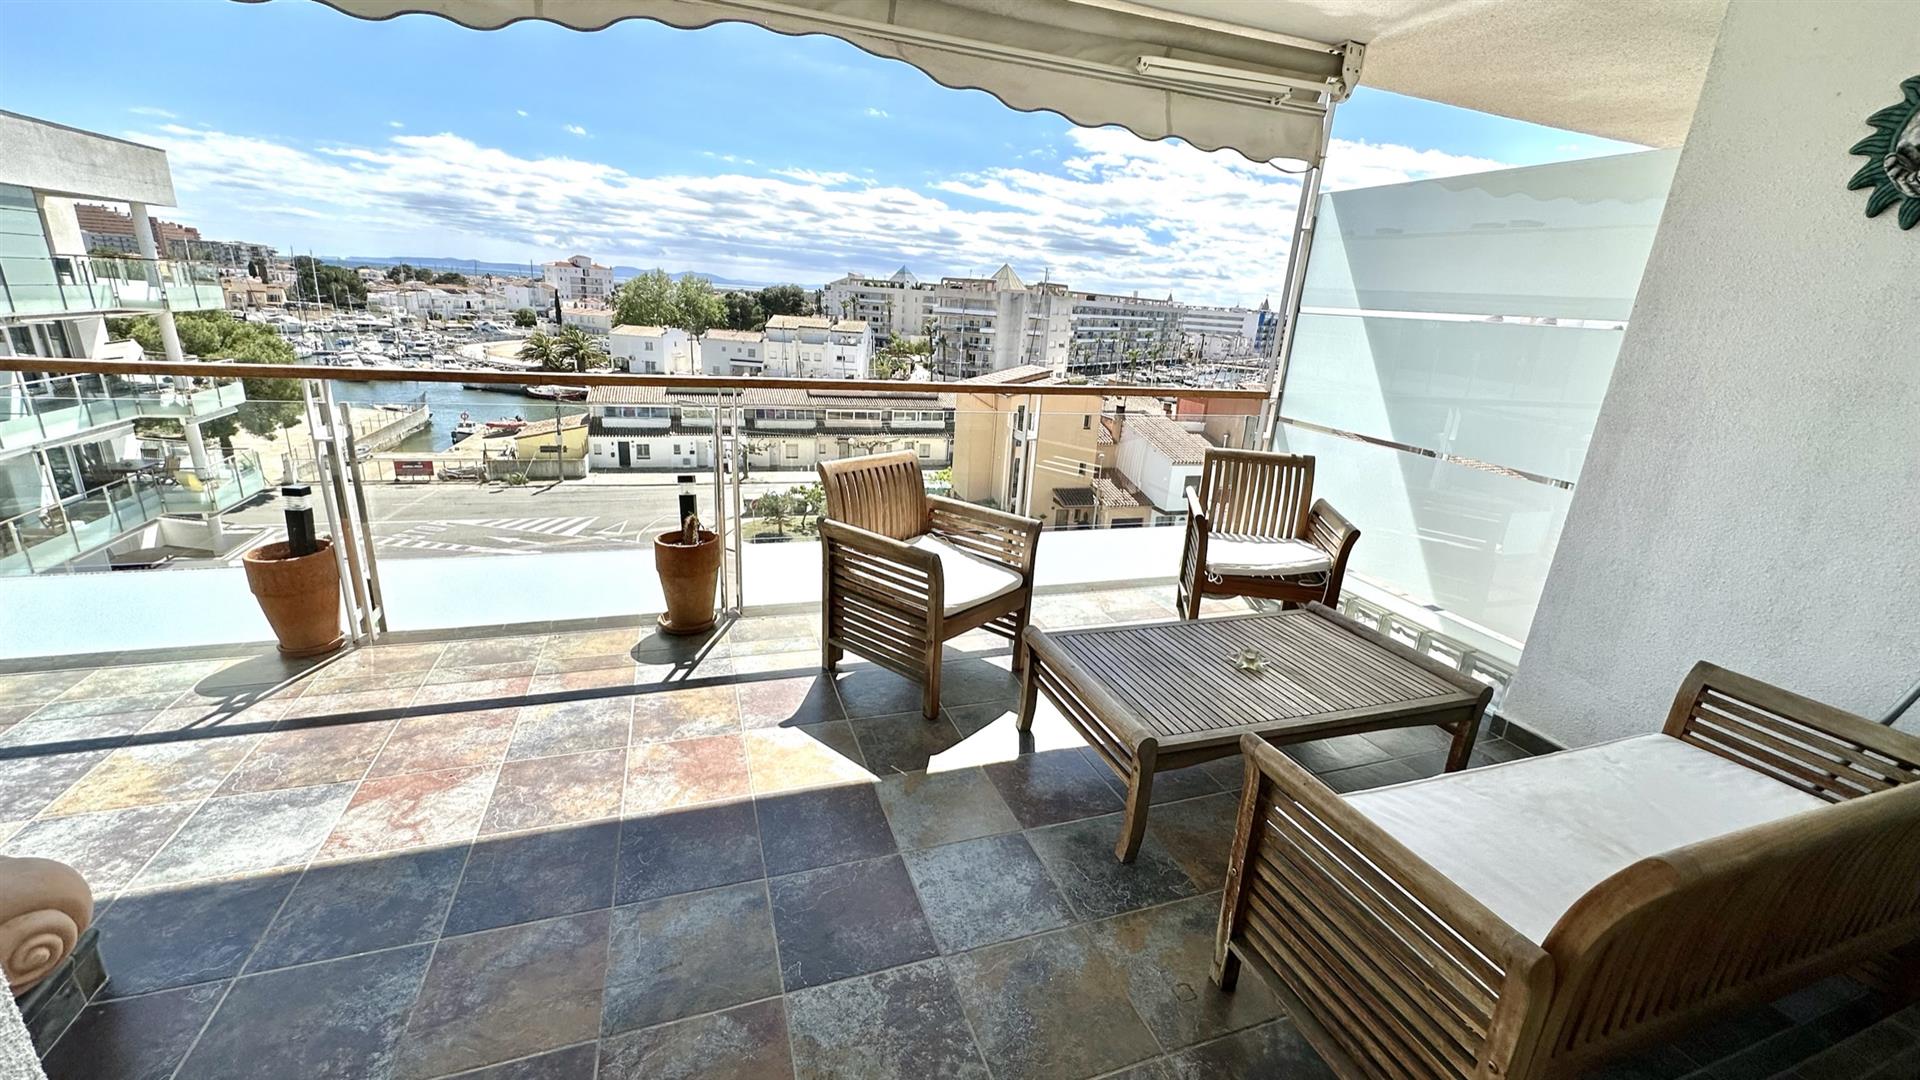 Beautiful two-bedroom penthouse with solarium, pool, and private parking